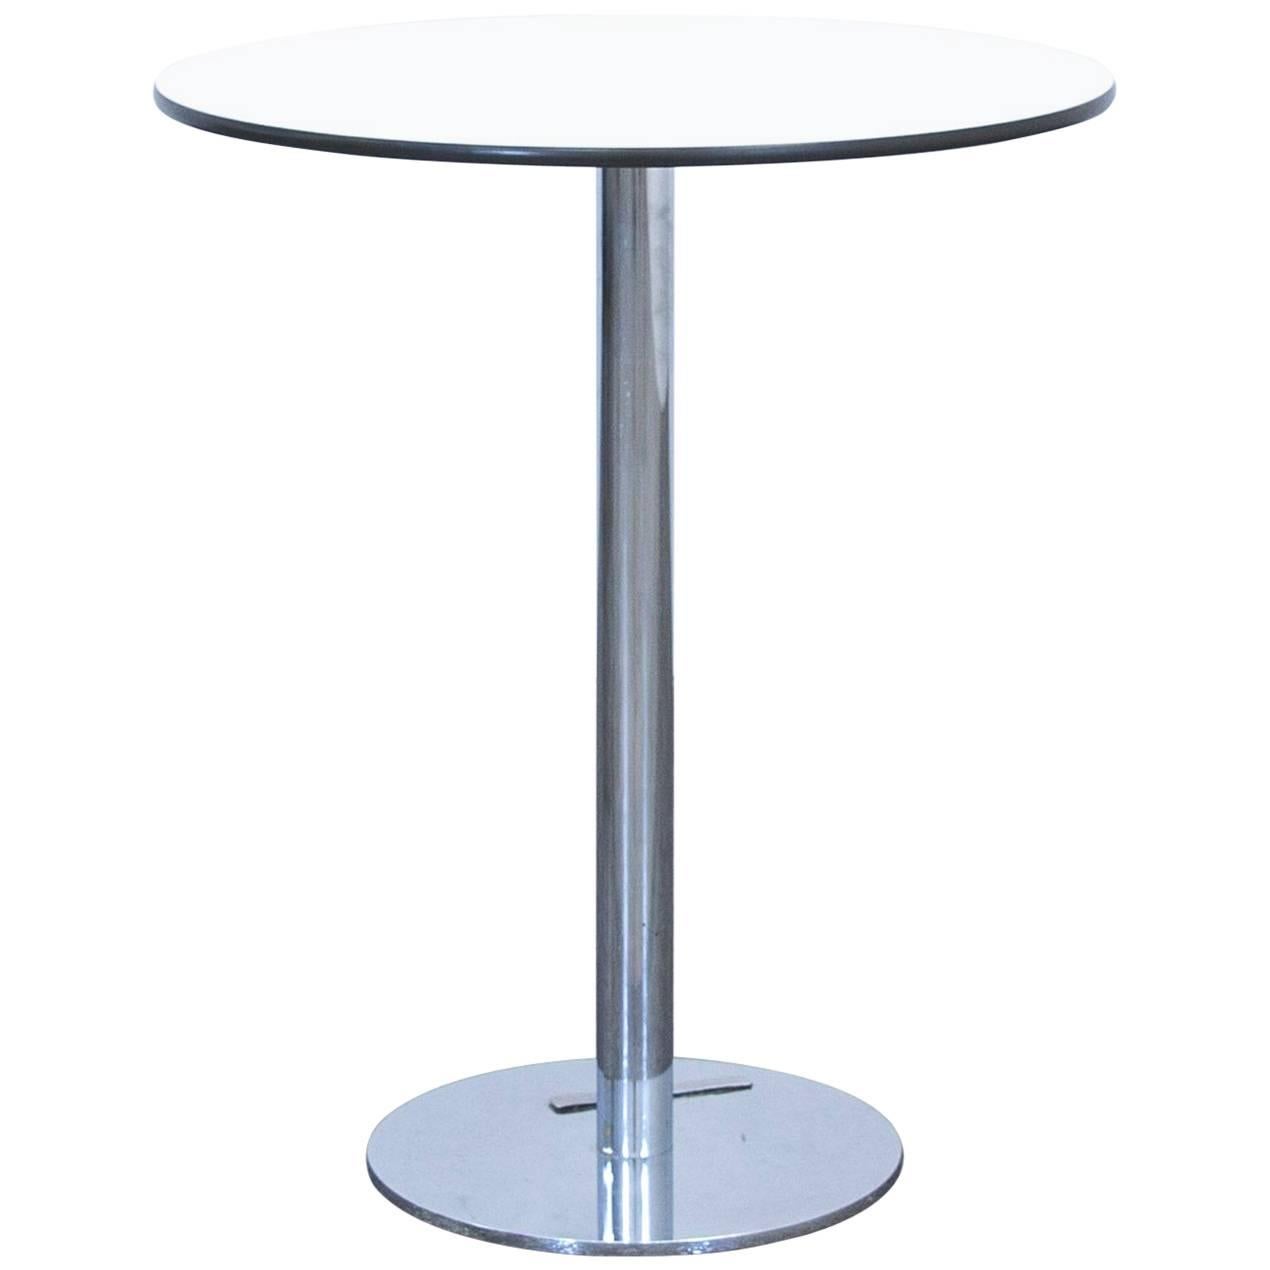 Designer Table White Wood Chrome Swiss Air Lounge Bistro Round Modern For Sale